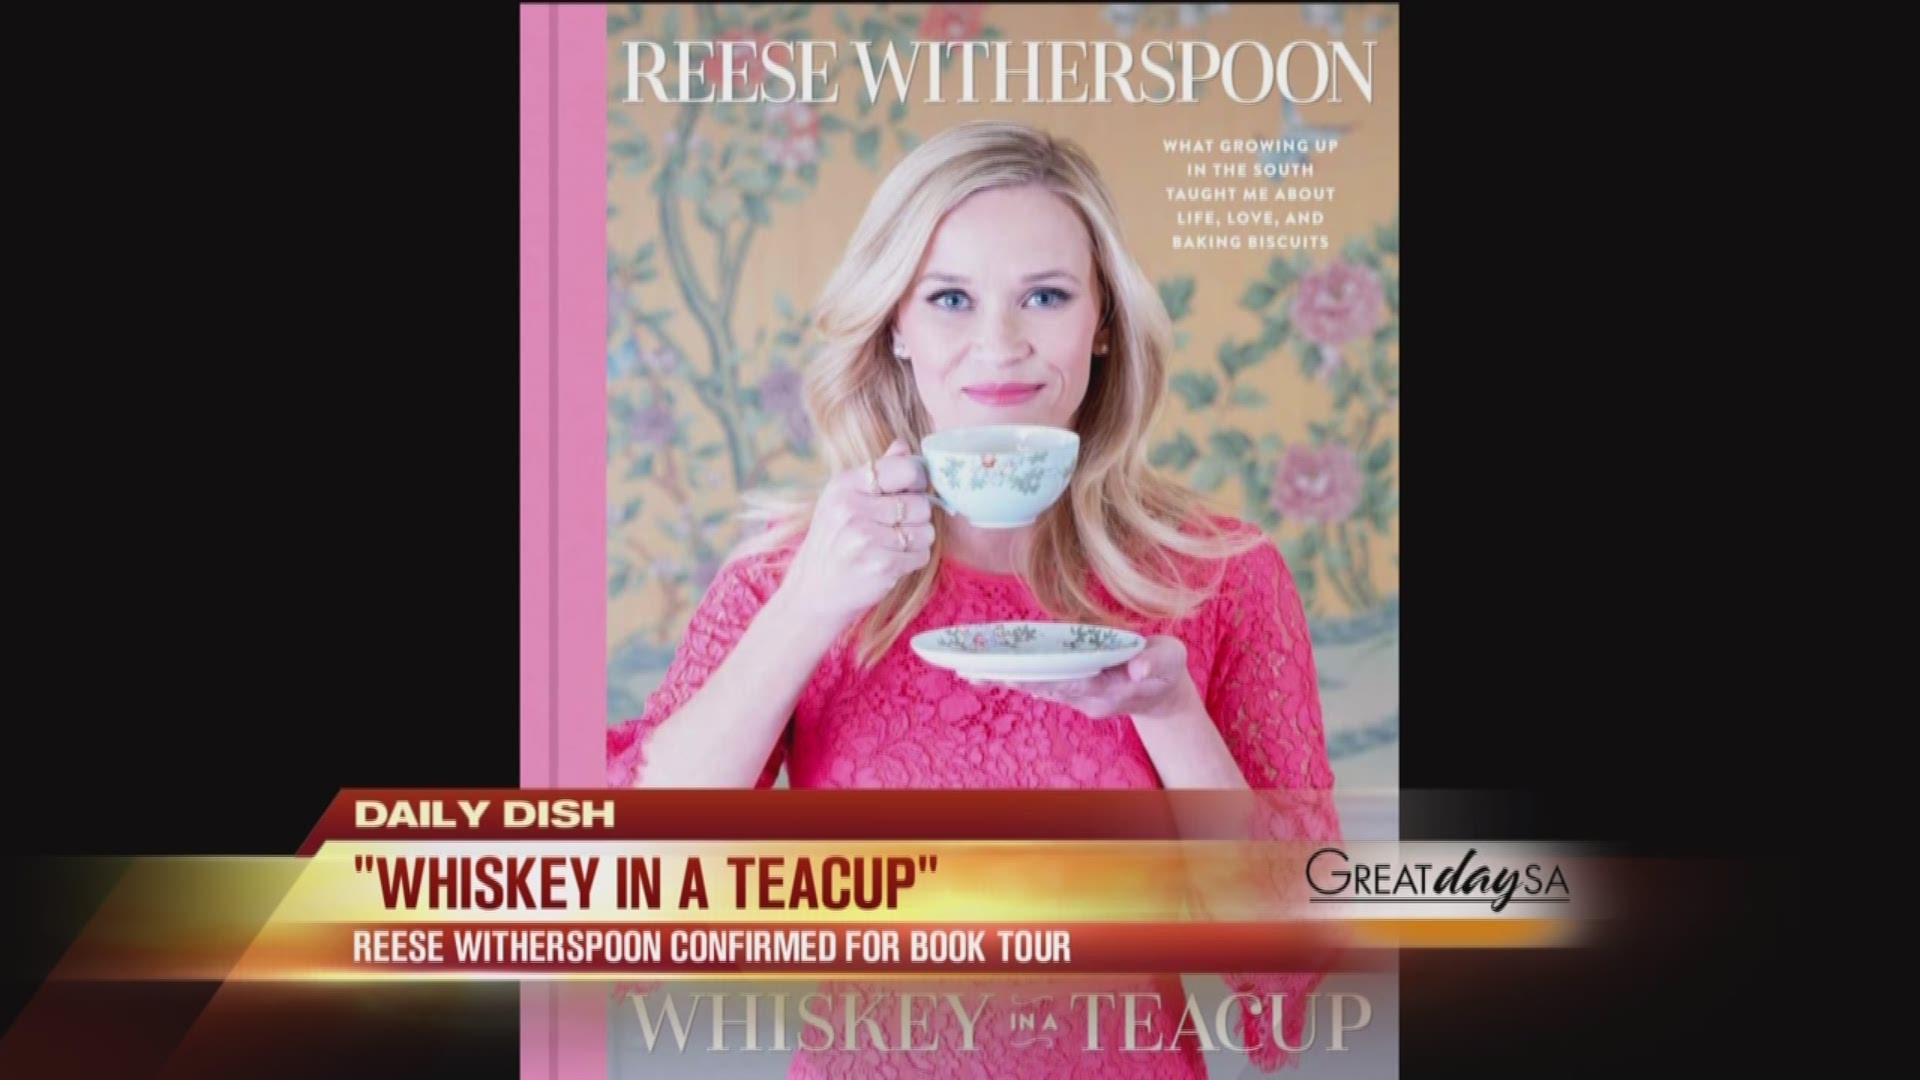 Reese Witherspoon Comes to Texas